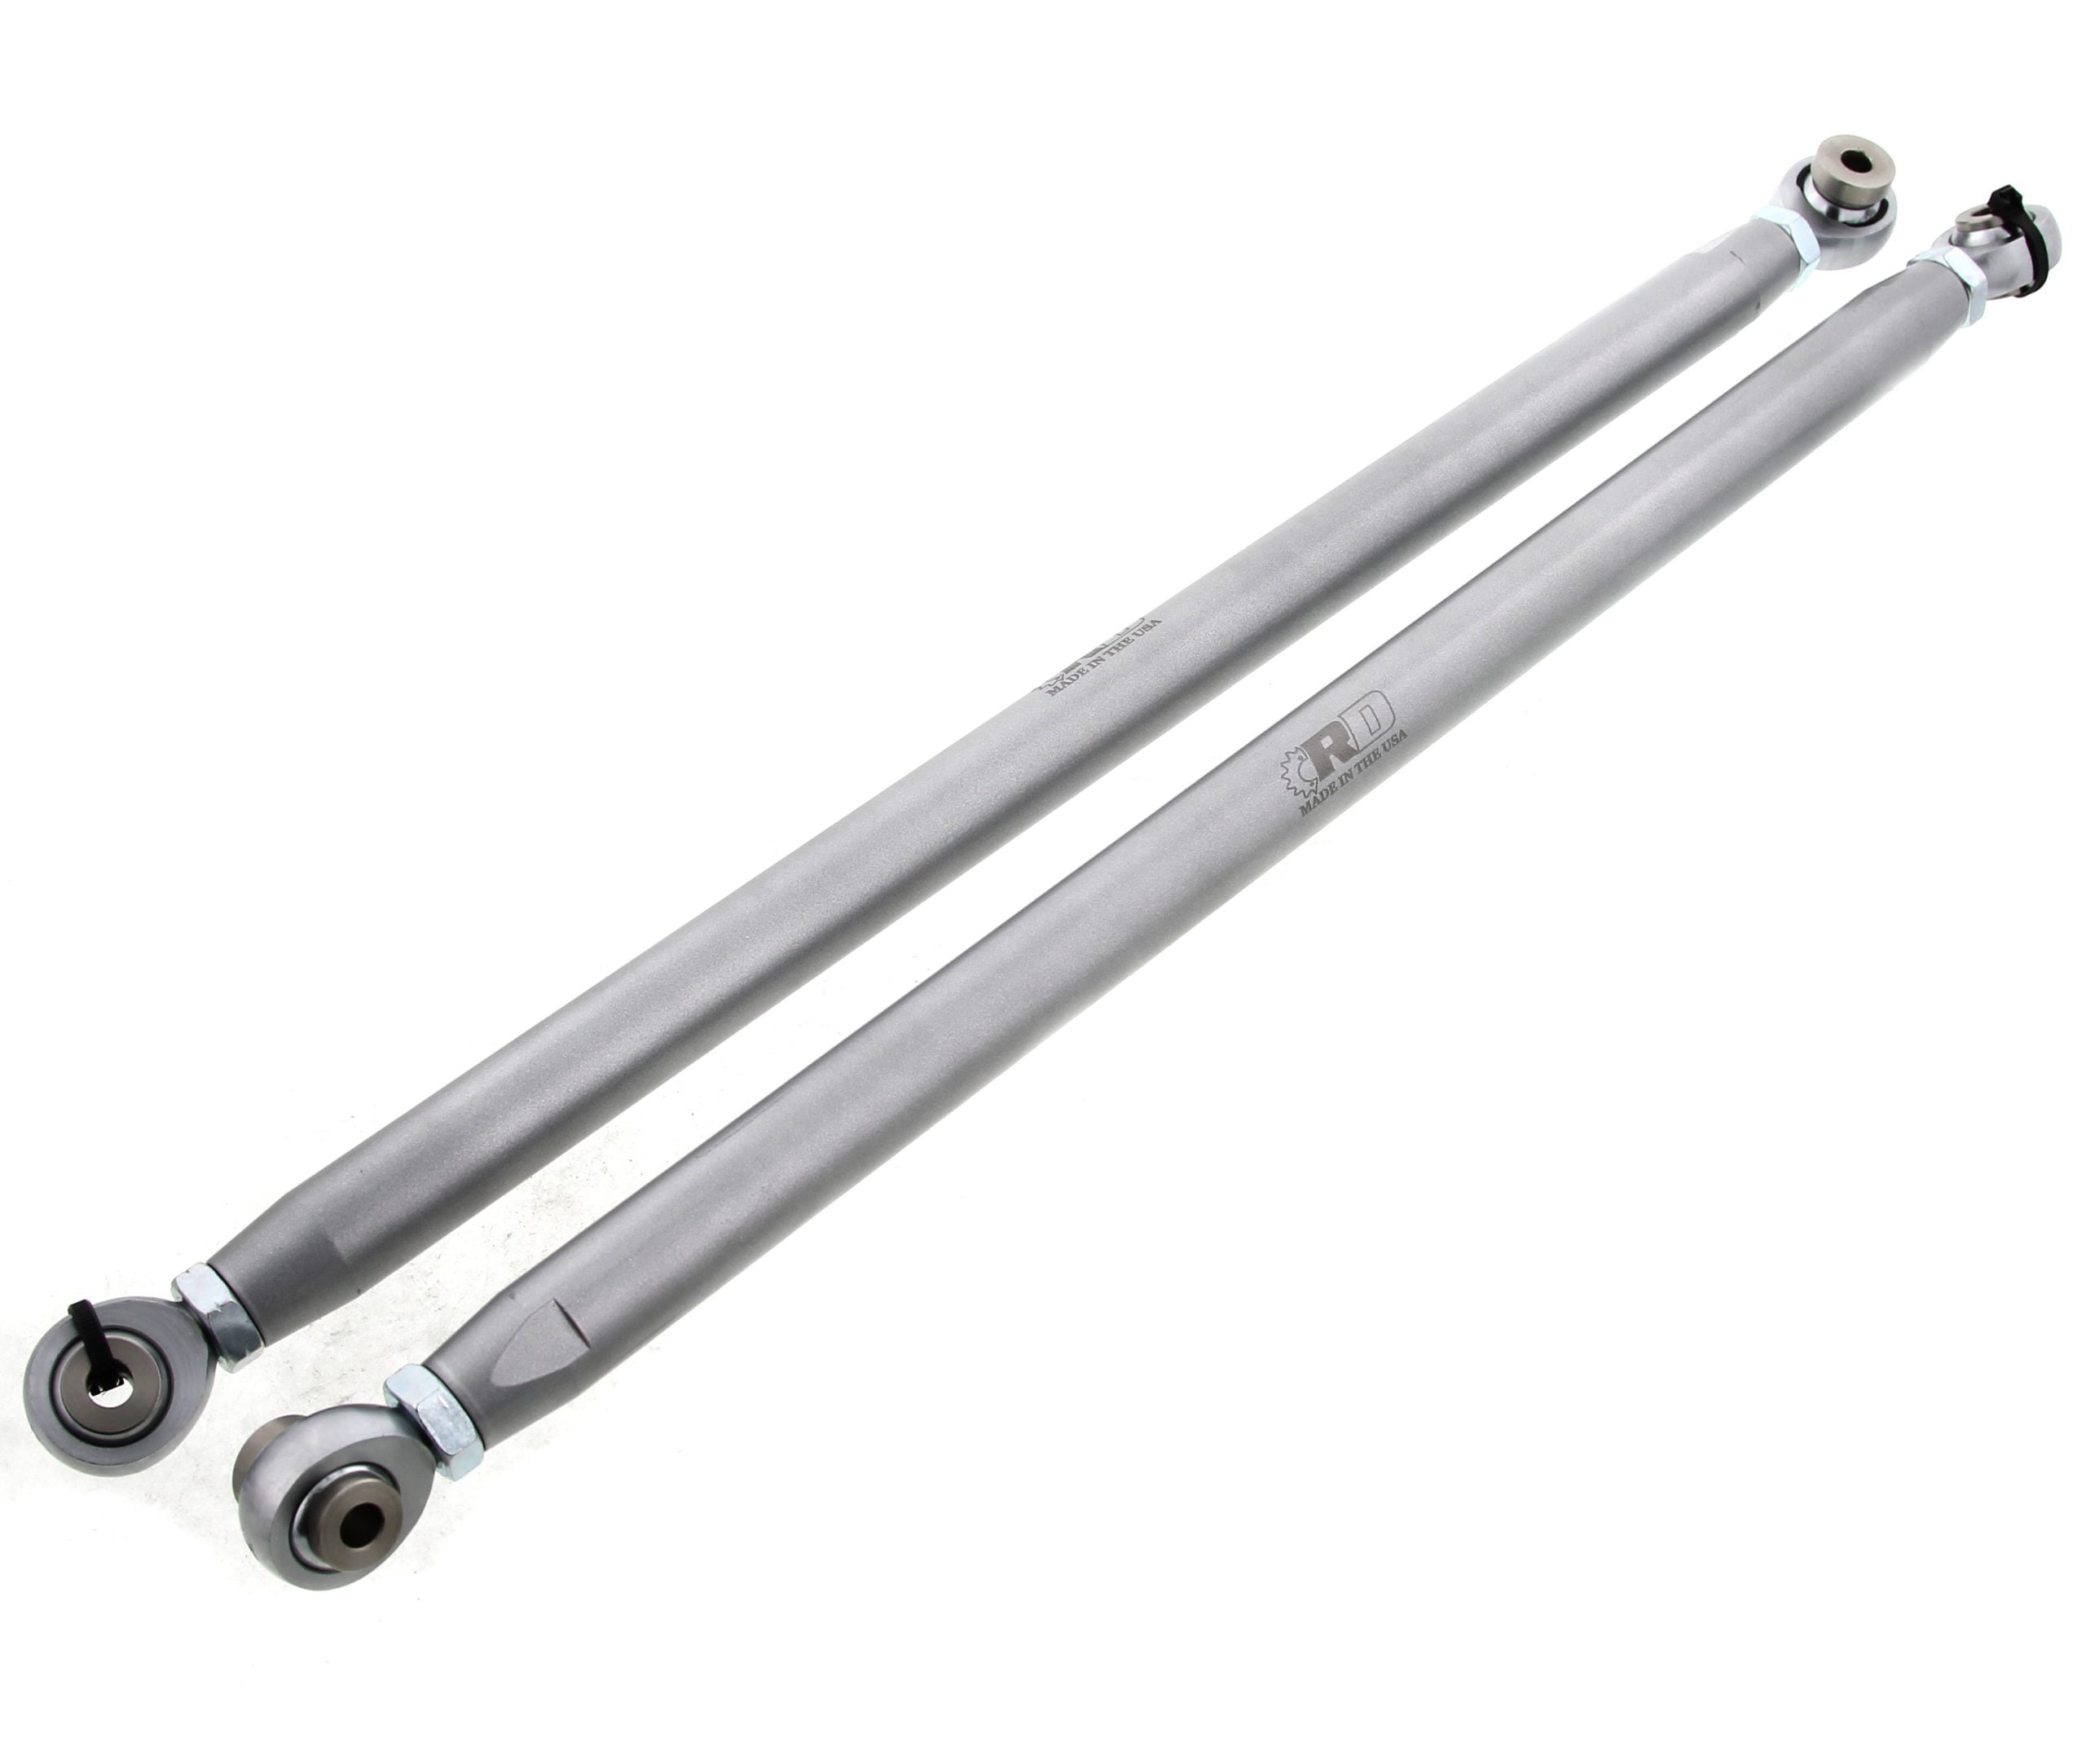 Rear Radius Rods fit Polaris RZR XP 1000 2014-2017 Upper Silver x2 Made in USA by Race-Driven 